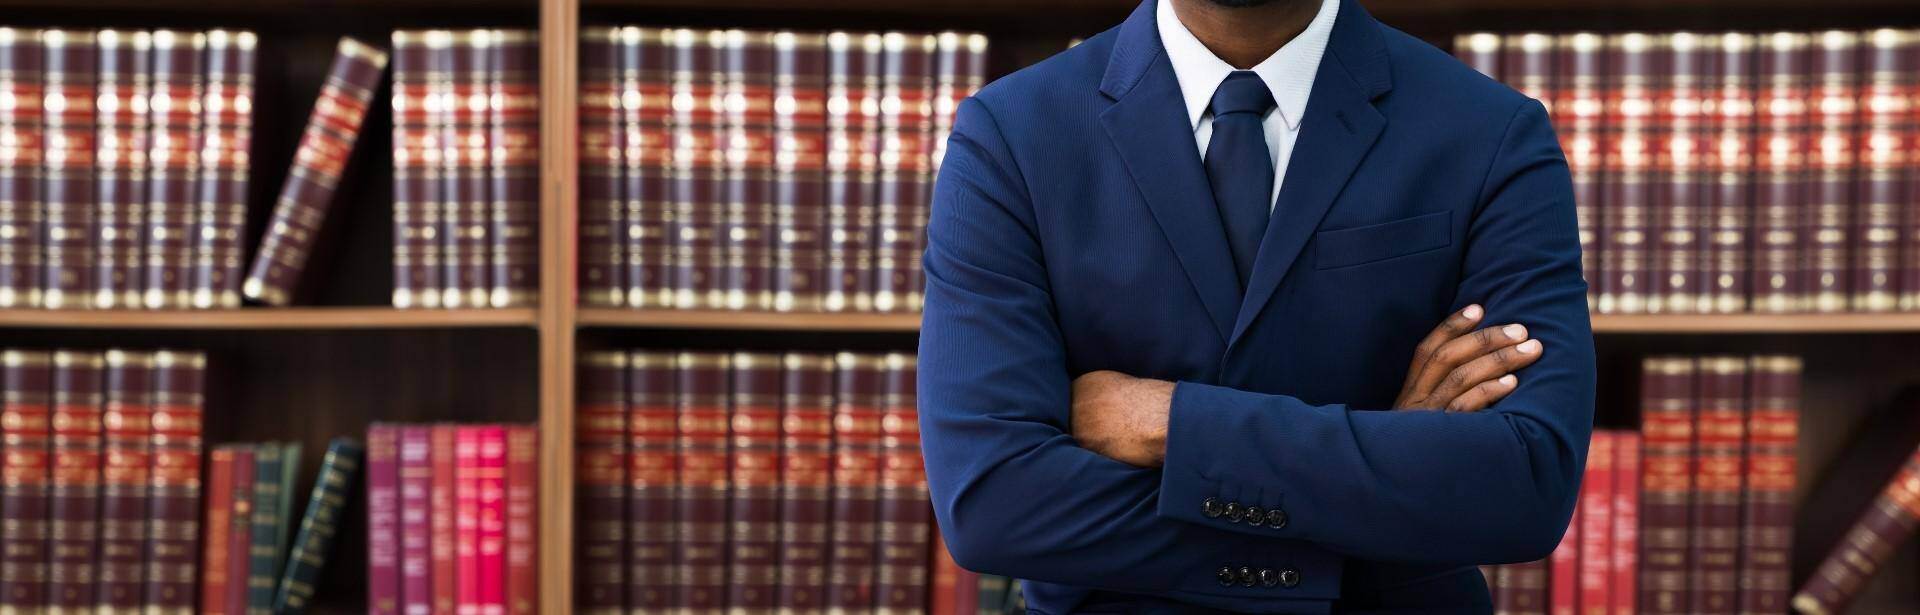 A black lawyer standing in front of a bookshelf of law book in Lawrenceville, Georgia